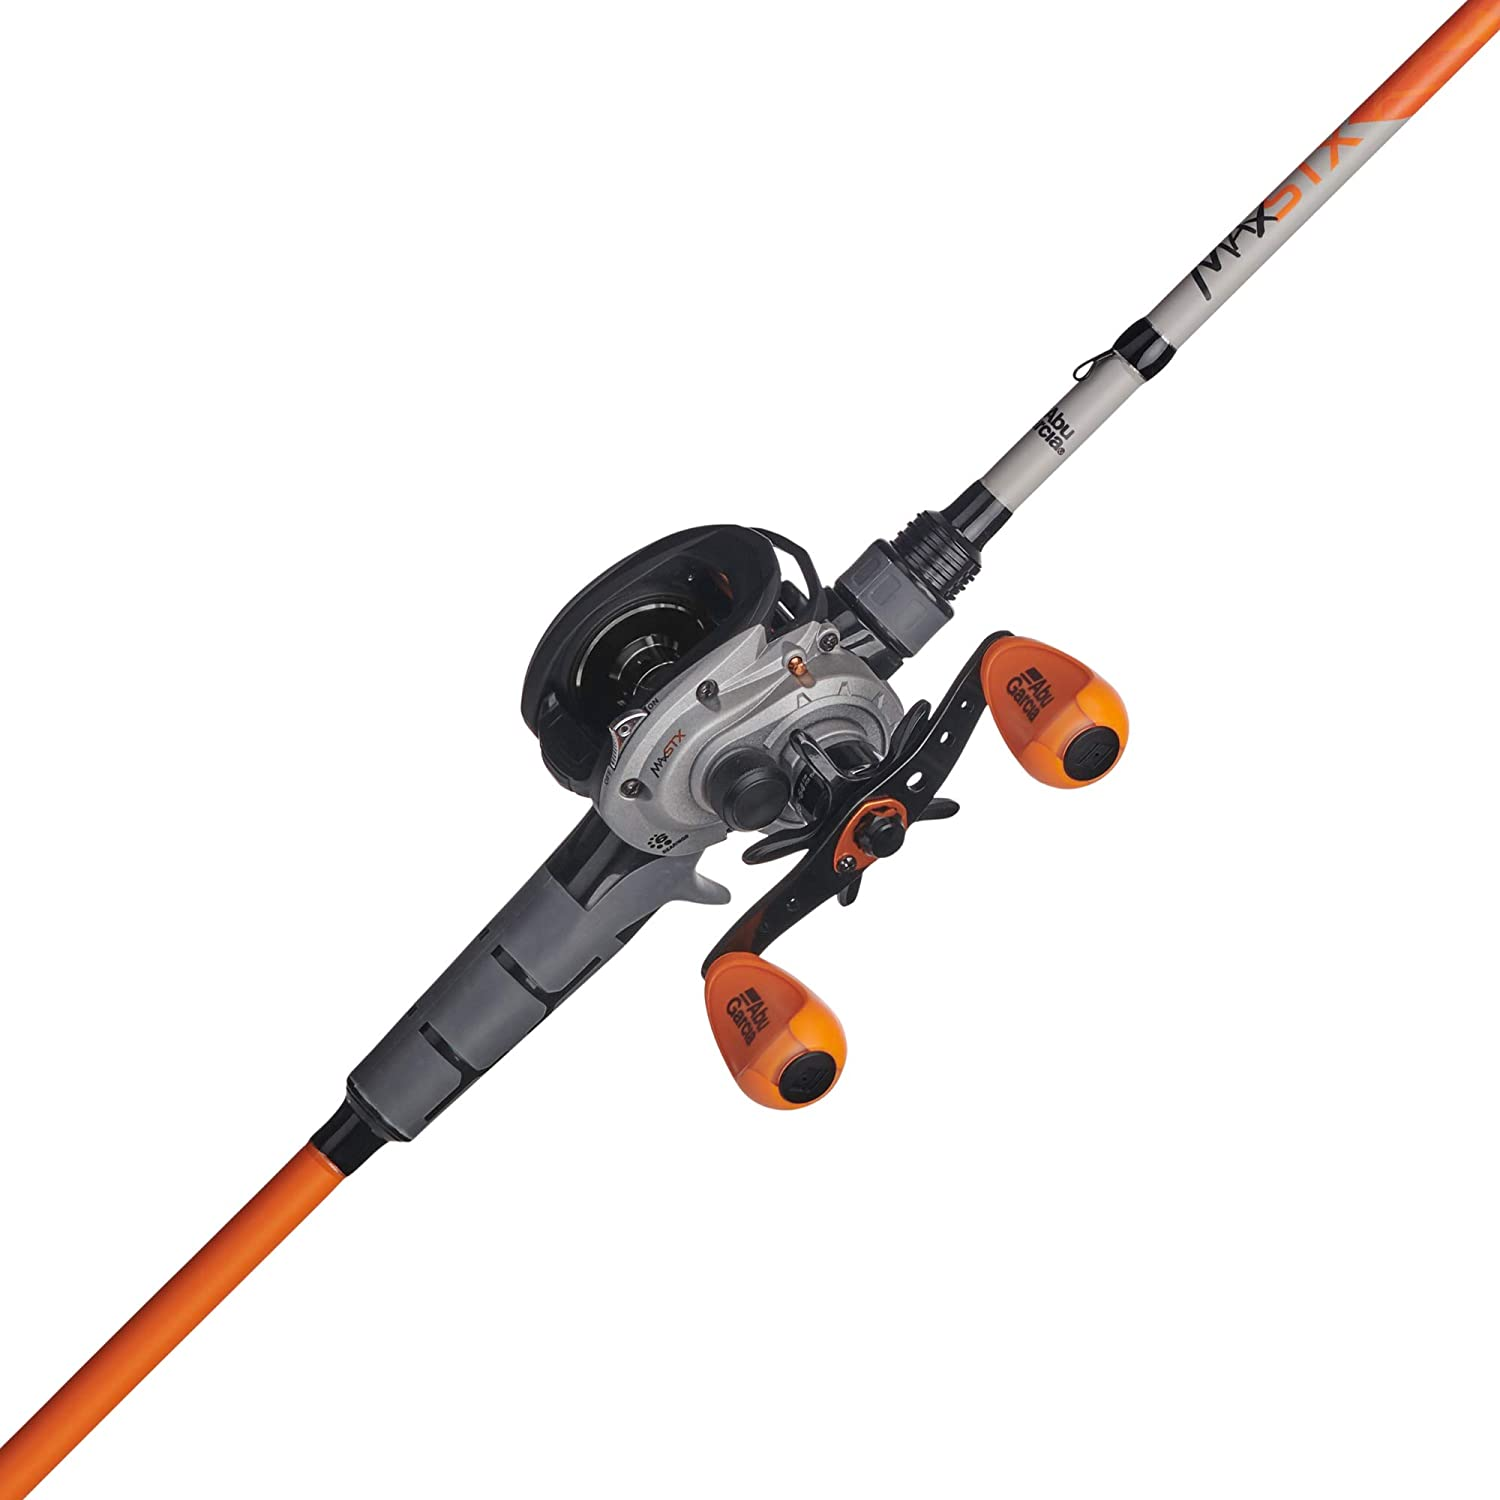 Abu Garcia Max STX Baitcast Reel and Fishing Rod Combo - Best for Freshwater and Saltwater 